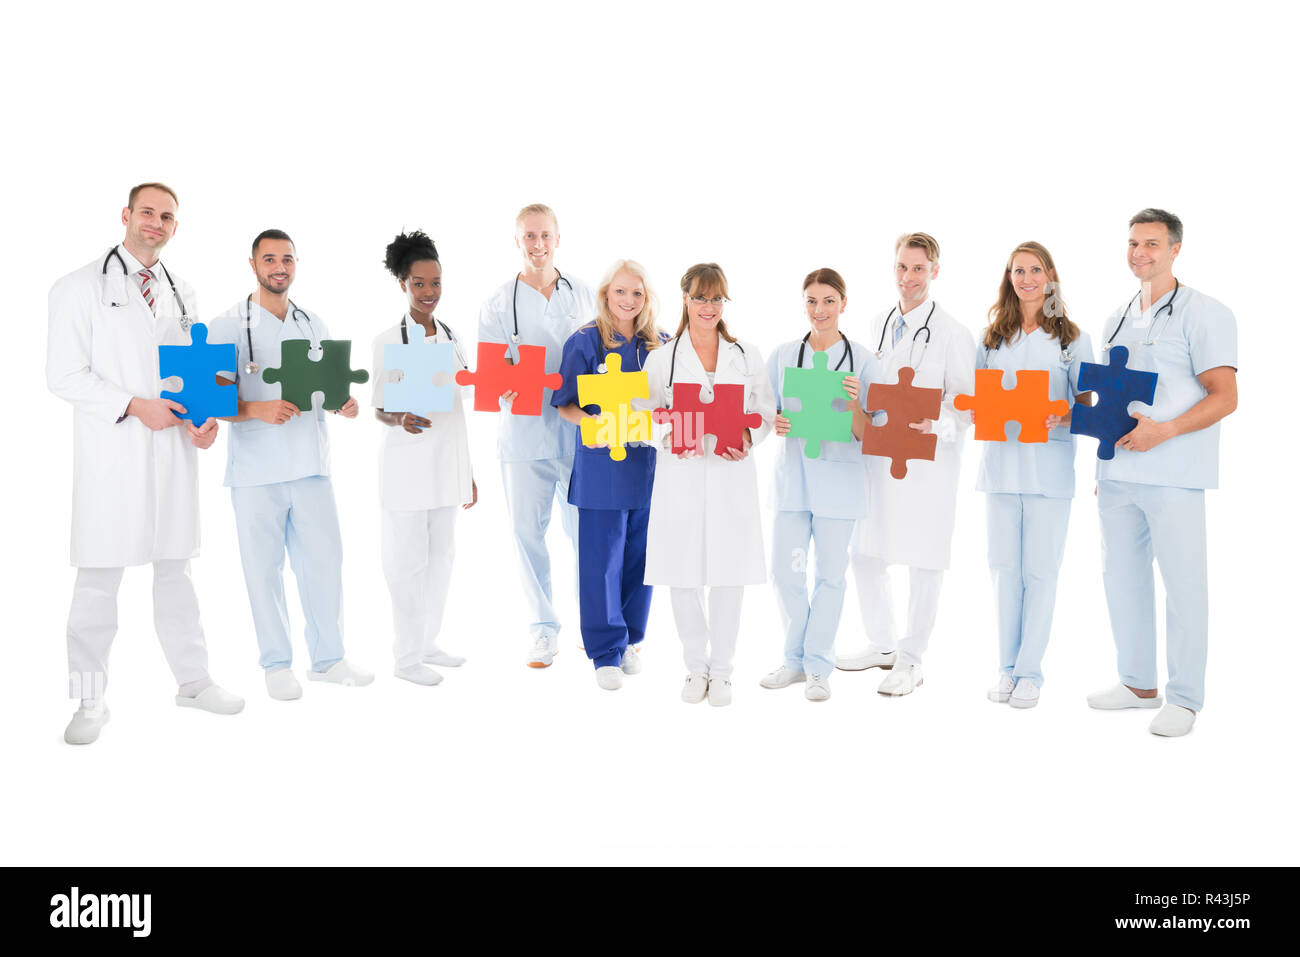 Confident Medical Team Holding Jigsaw Pieces Stock Photo